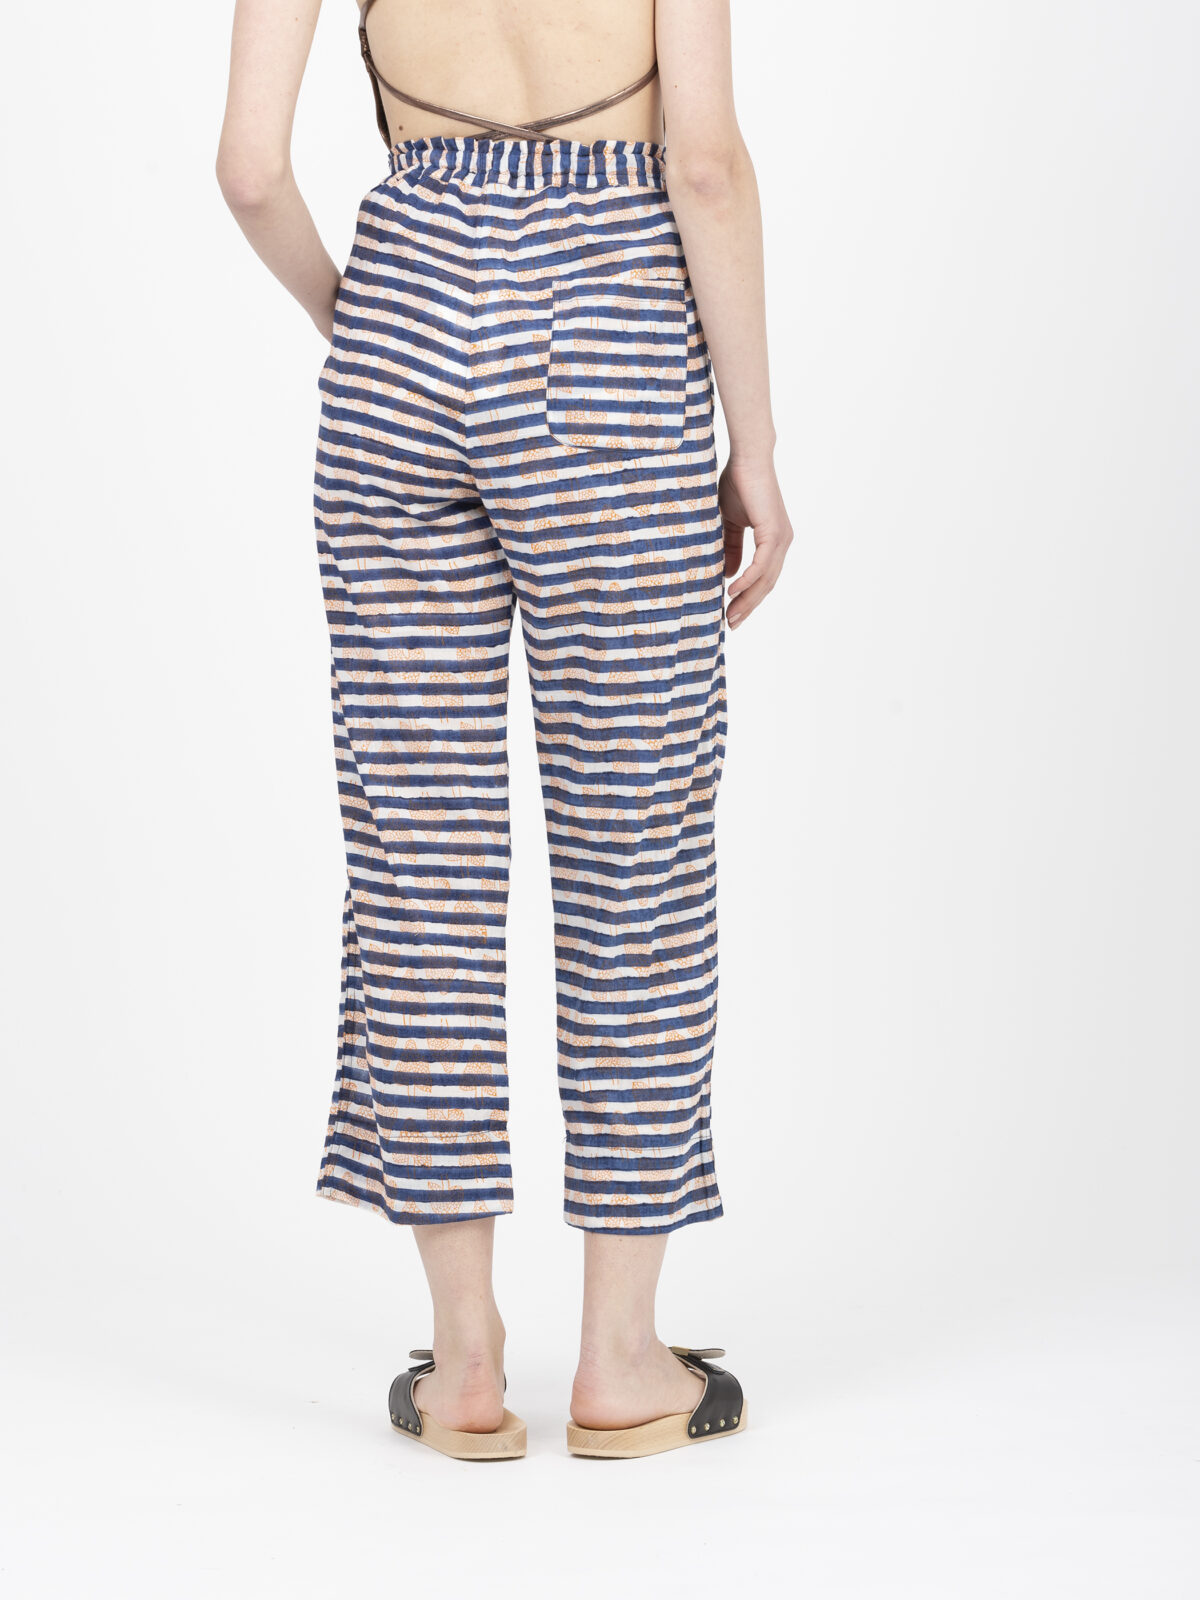 circa-voile-cotton-trousers-drawstring-relaxed-kimale-greek-designers-matchboxathens